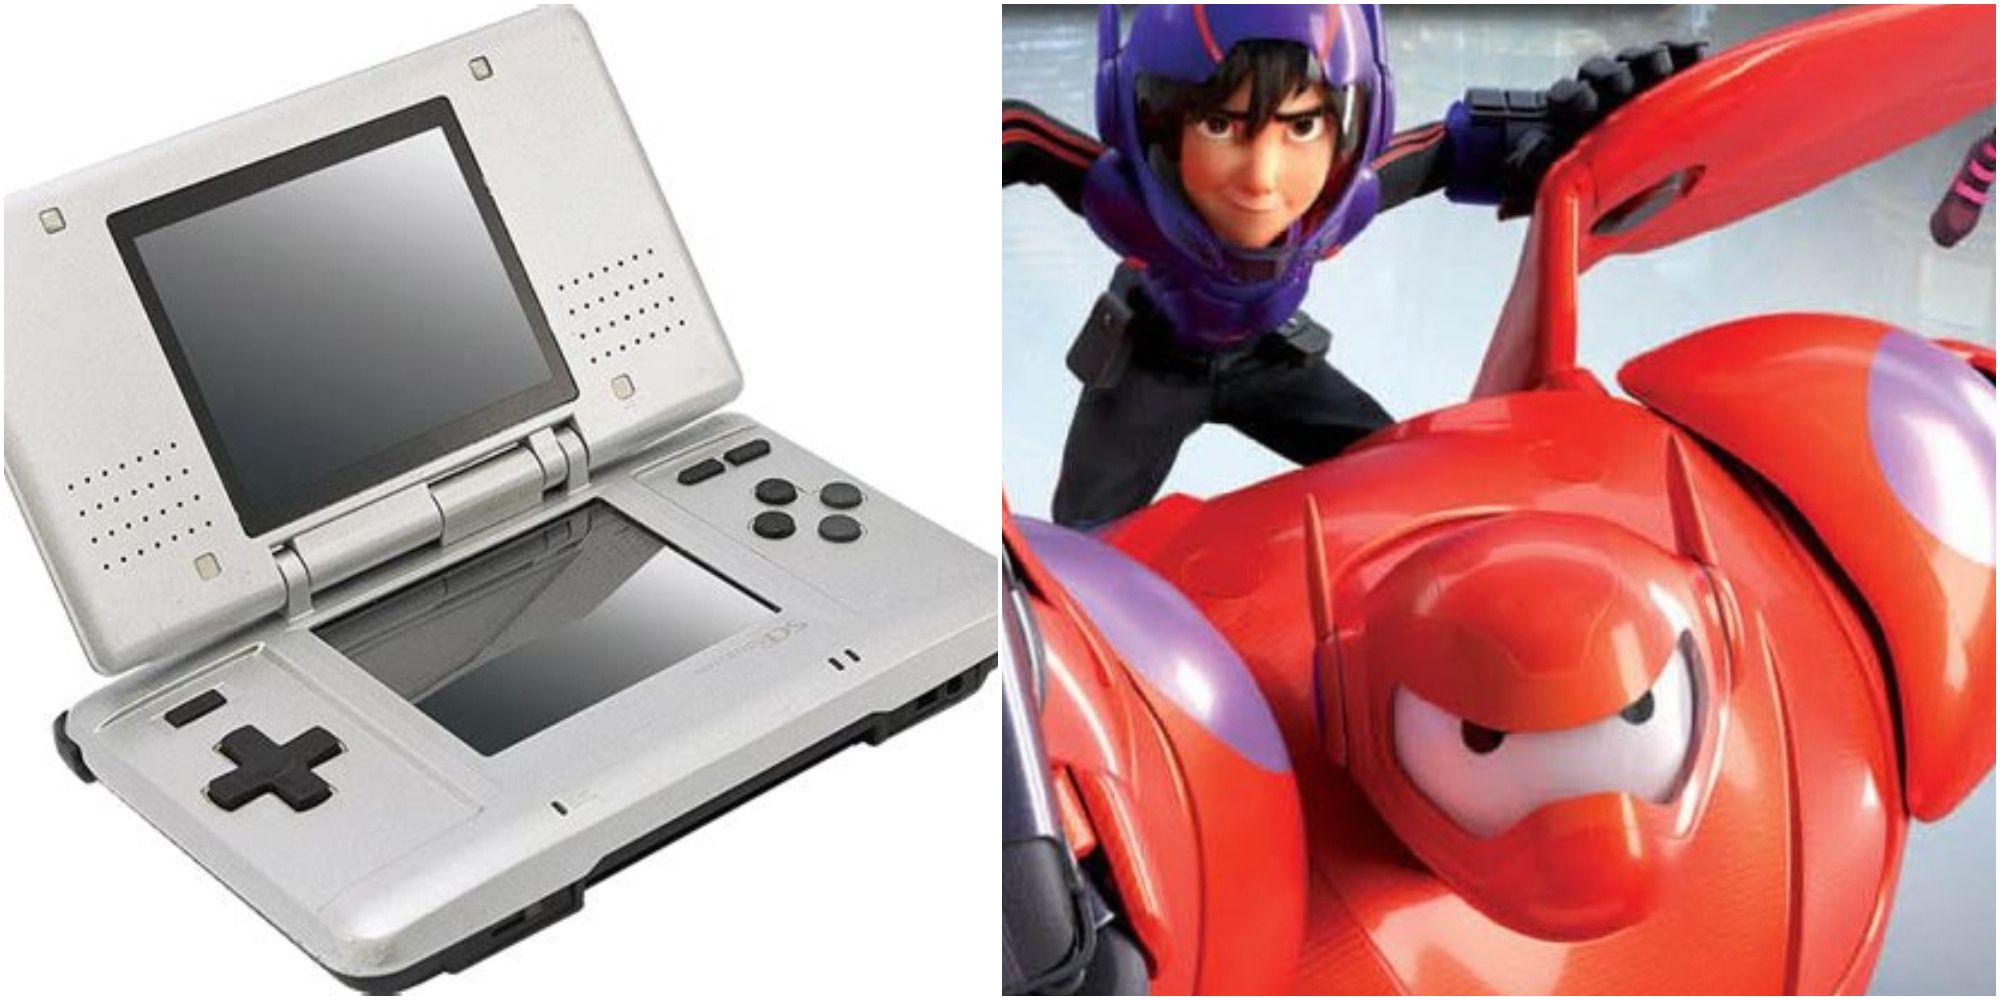 Nintendo DS console and Big Hero 6: Battle in the Bay Game